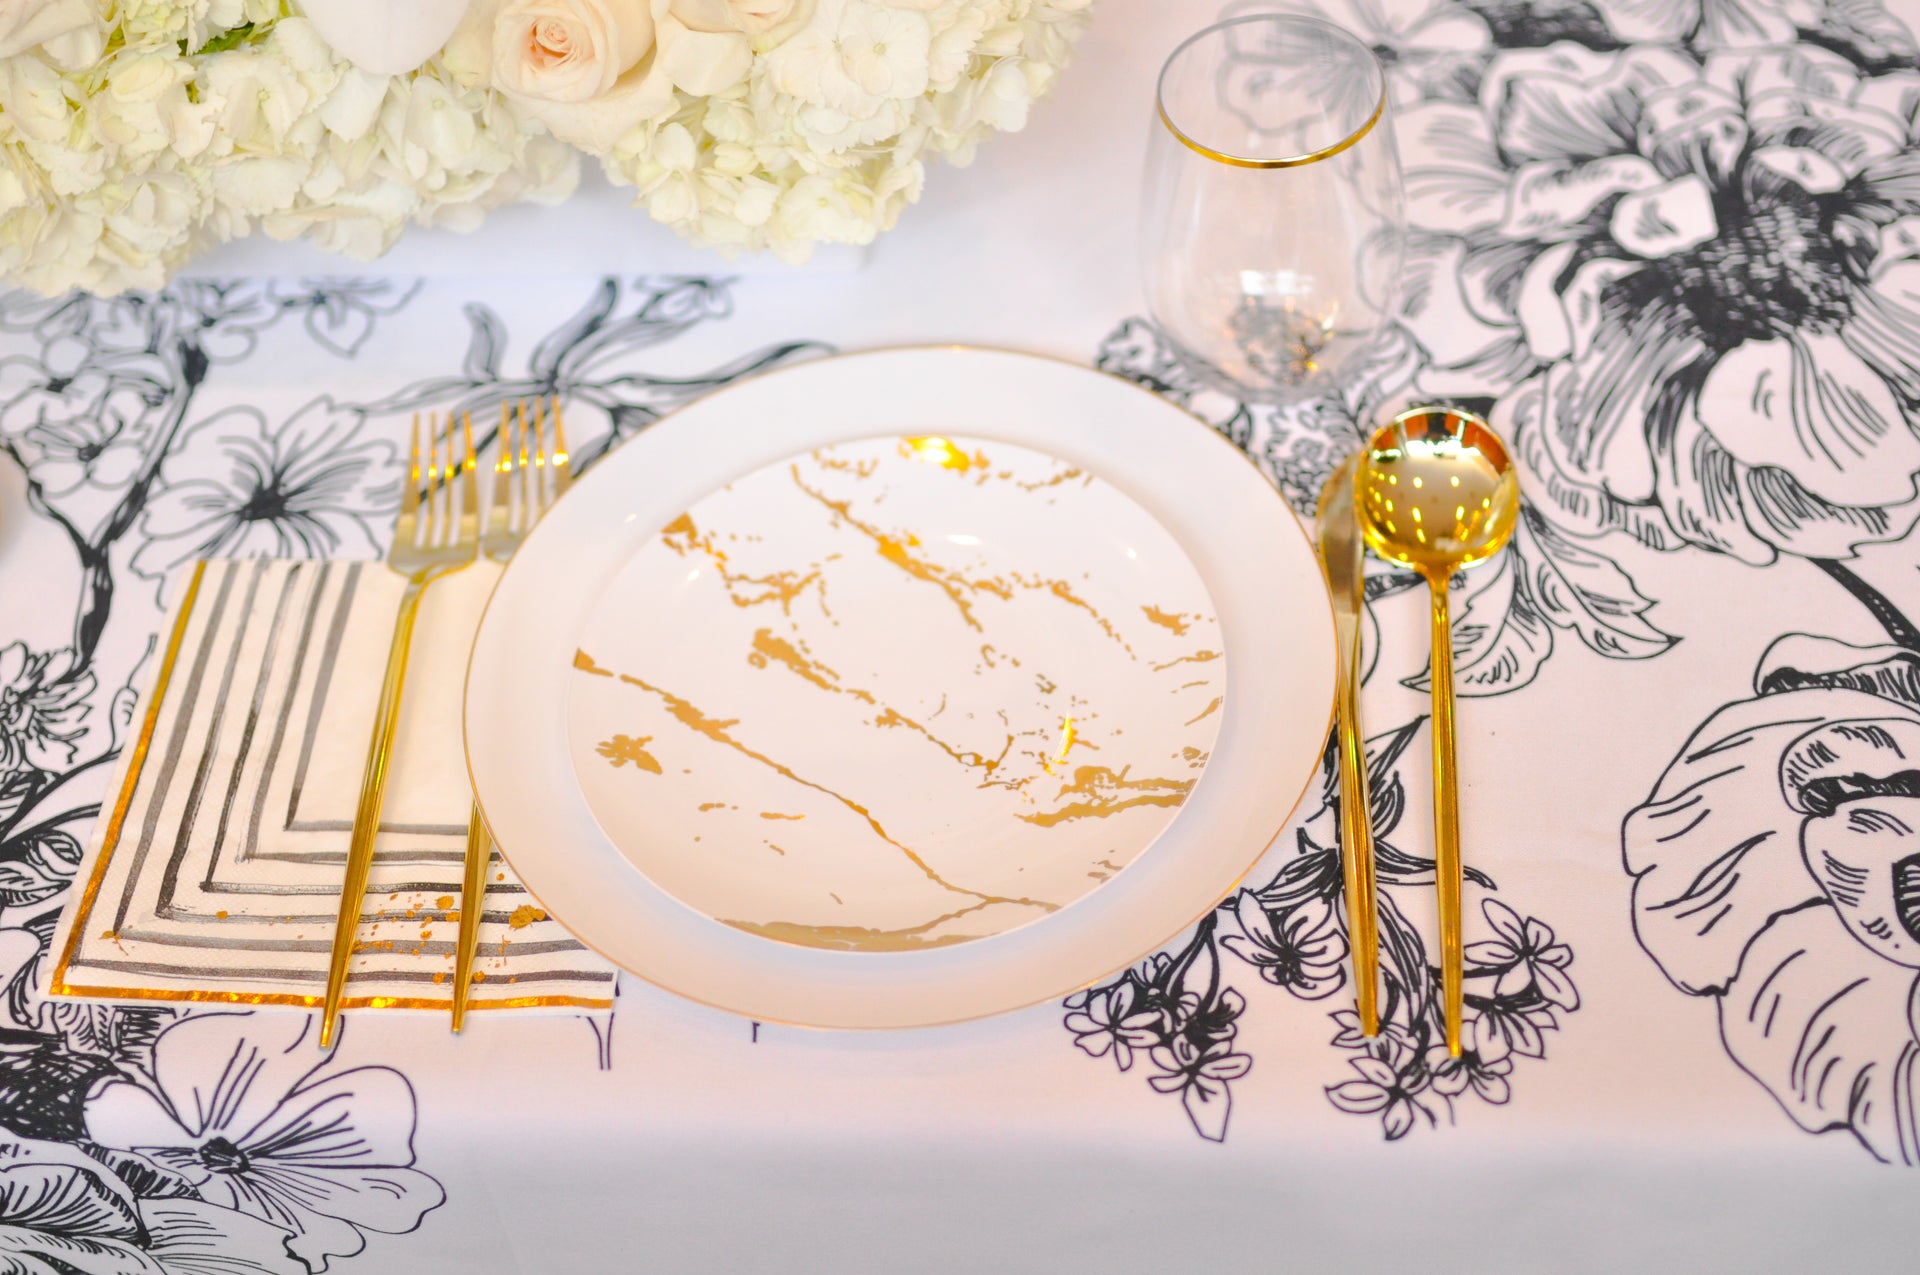 Simplicity and Sophistication: Idea for an Elegant Wedding Tablescape